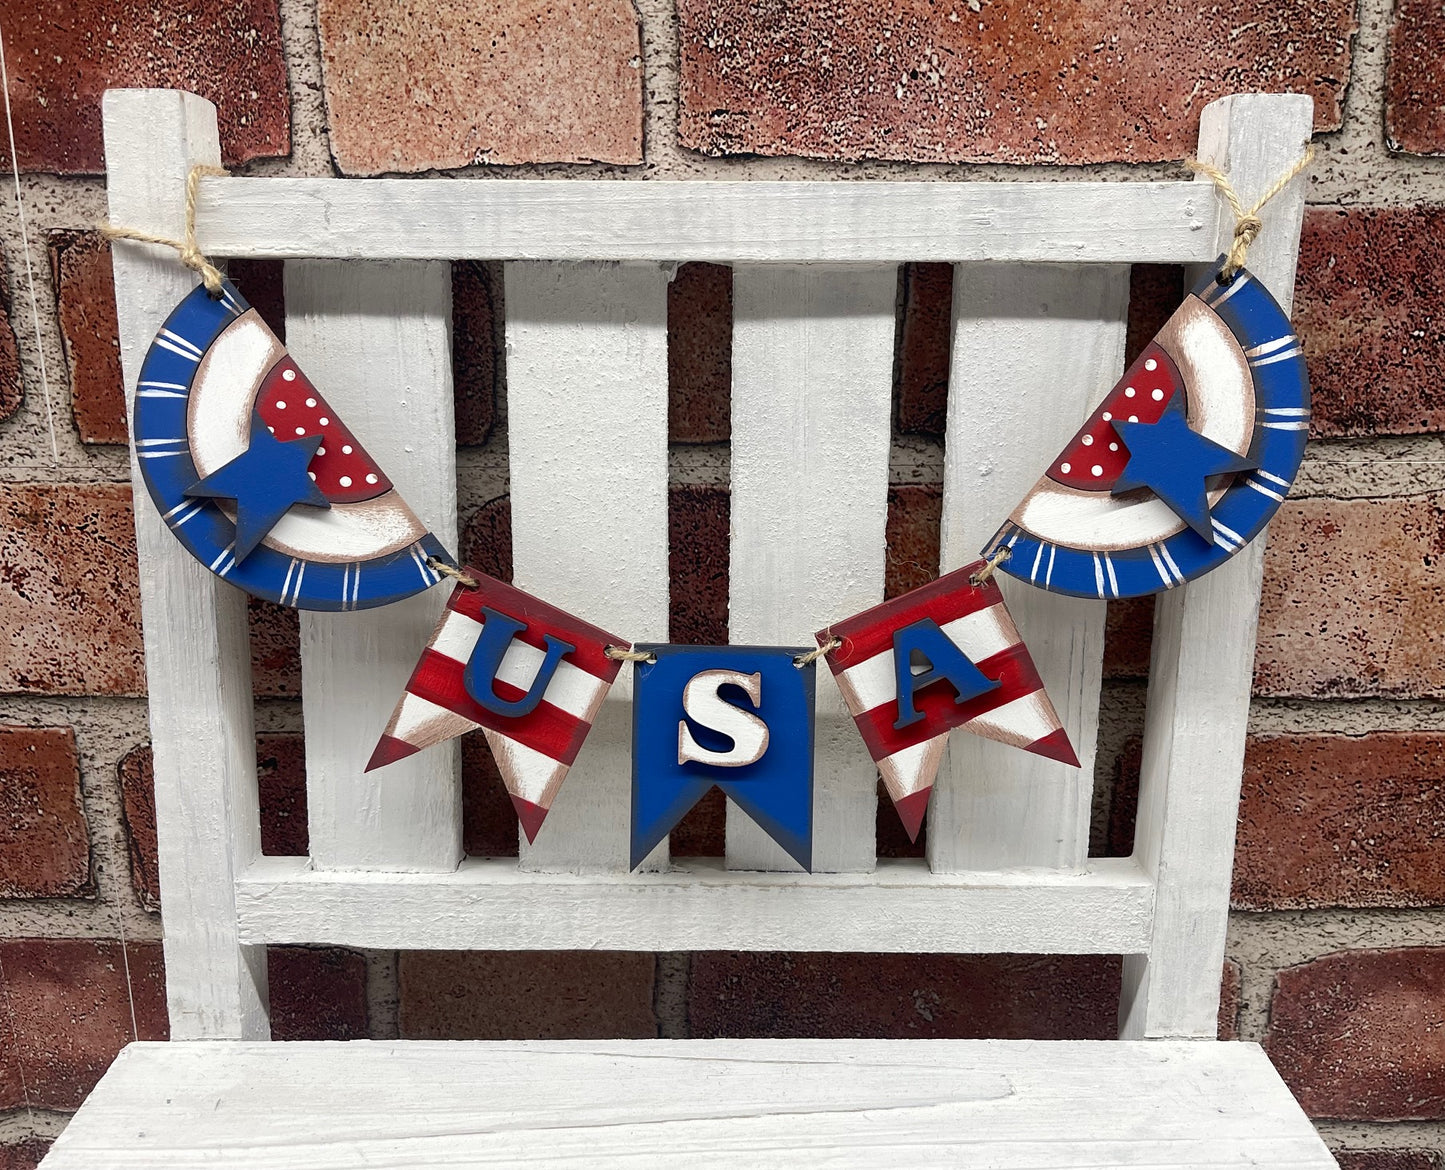 June Craft Kit - Patriotic Themed - basket and water globe not included